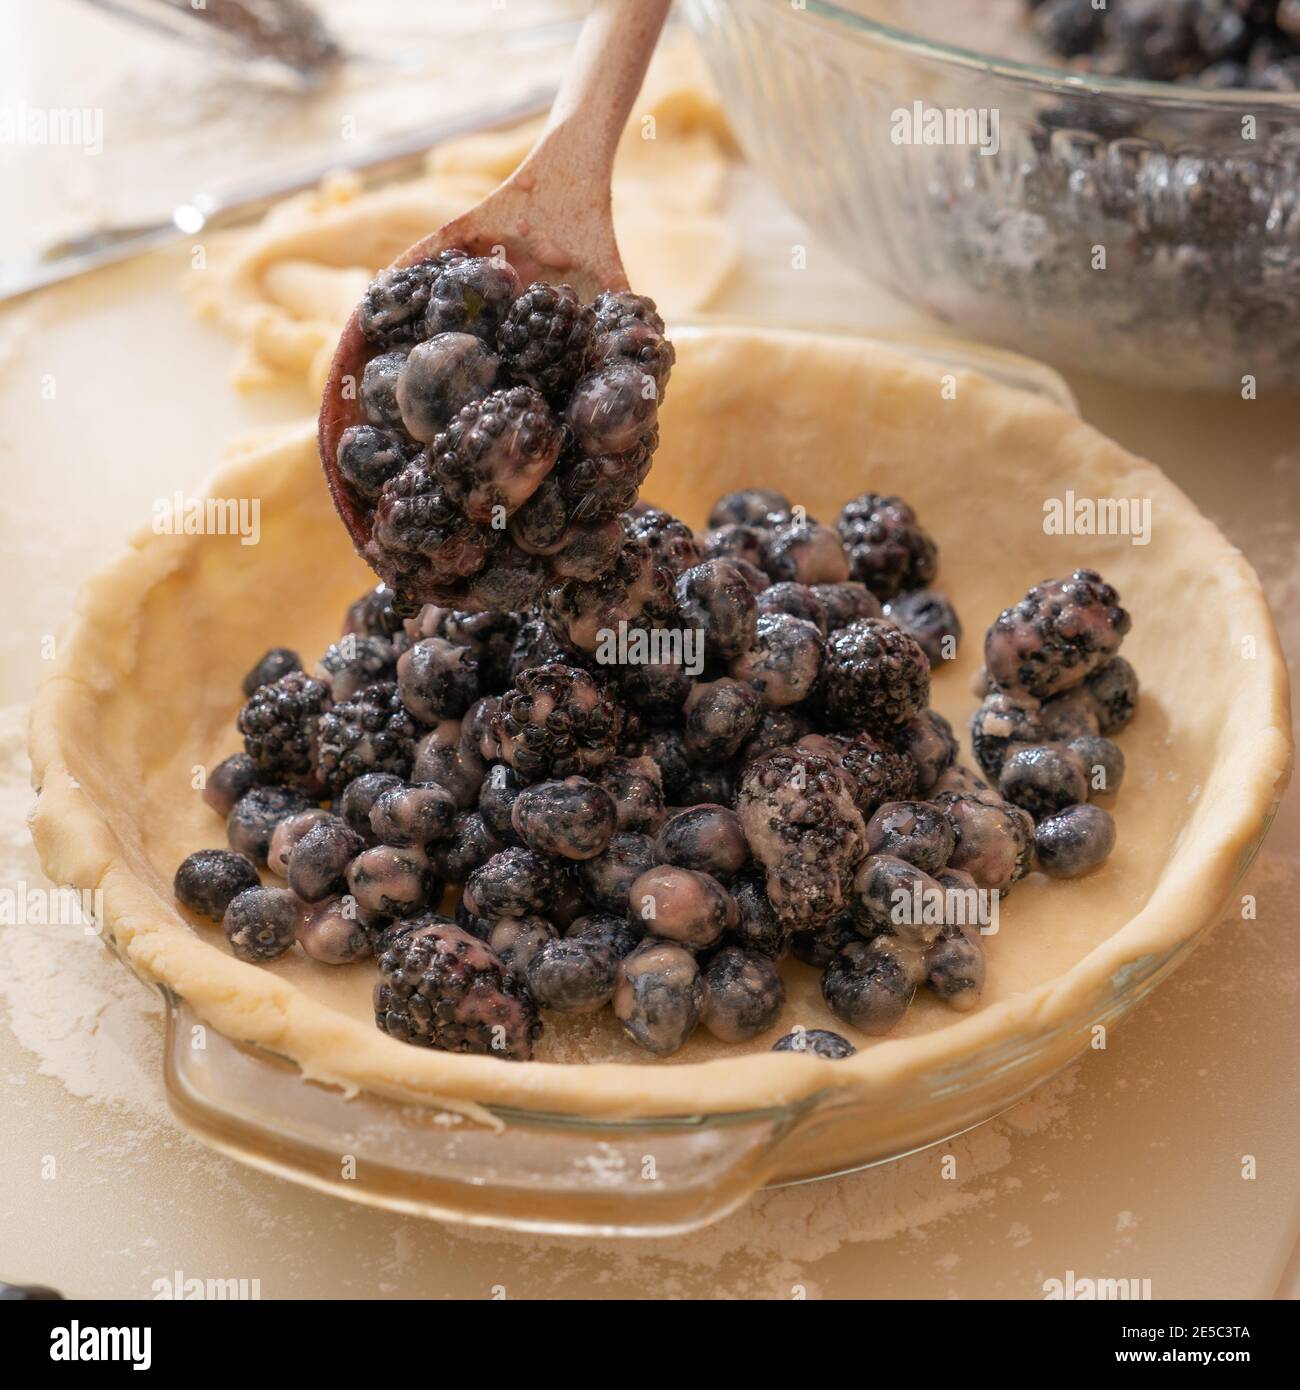 filling pie crust with berries Stock Photo